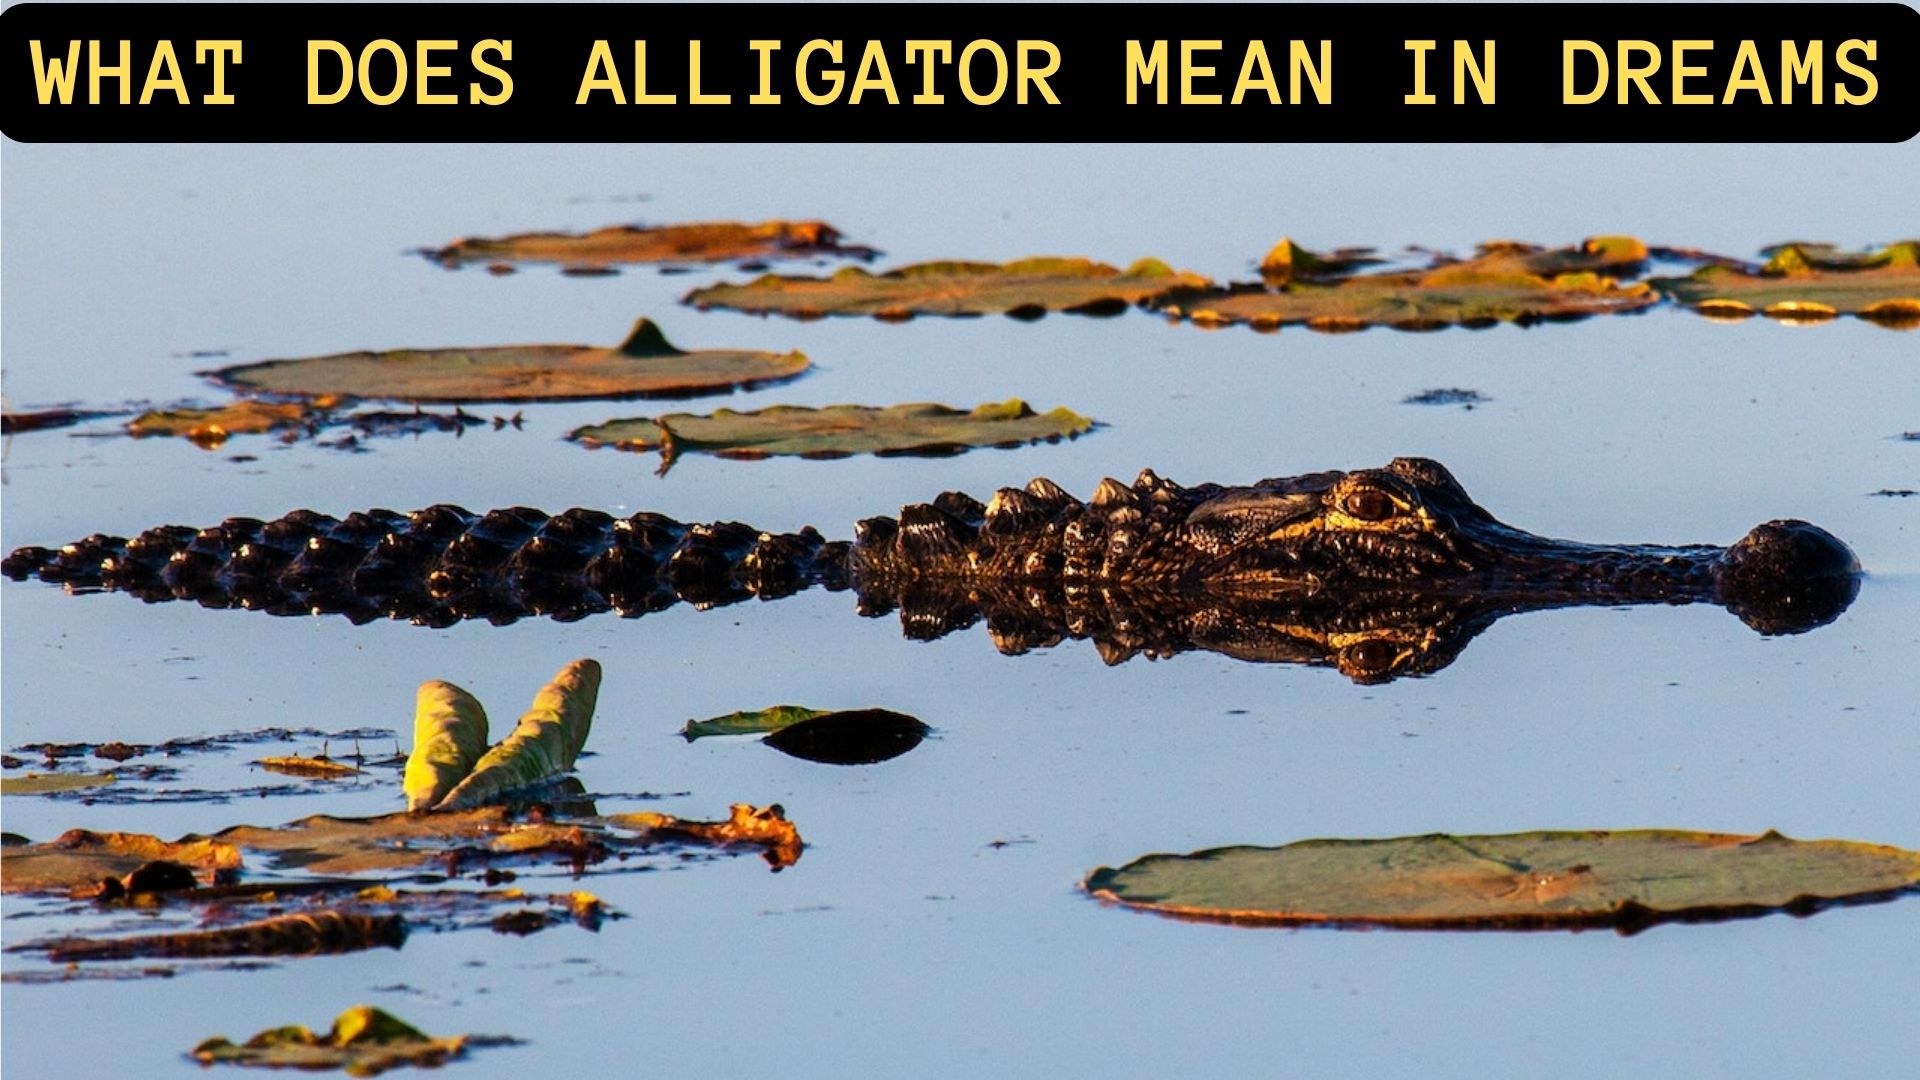 What Does Alligator Mean In Dreams?